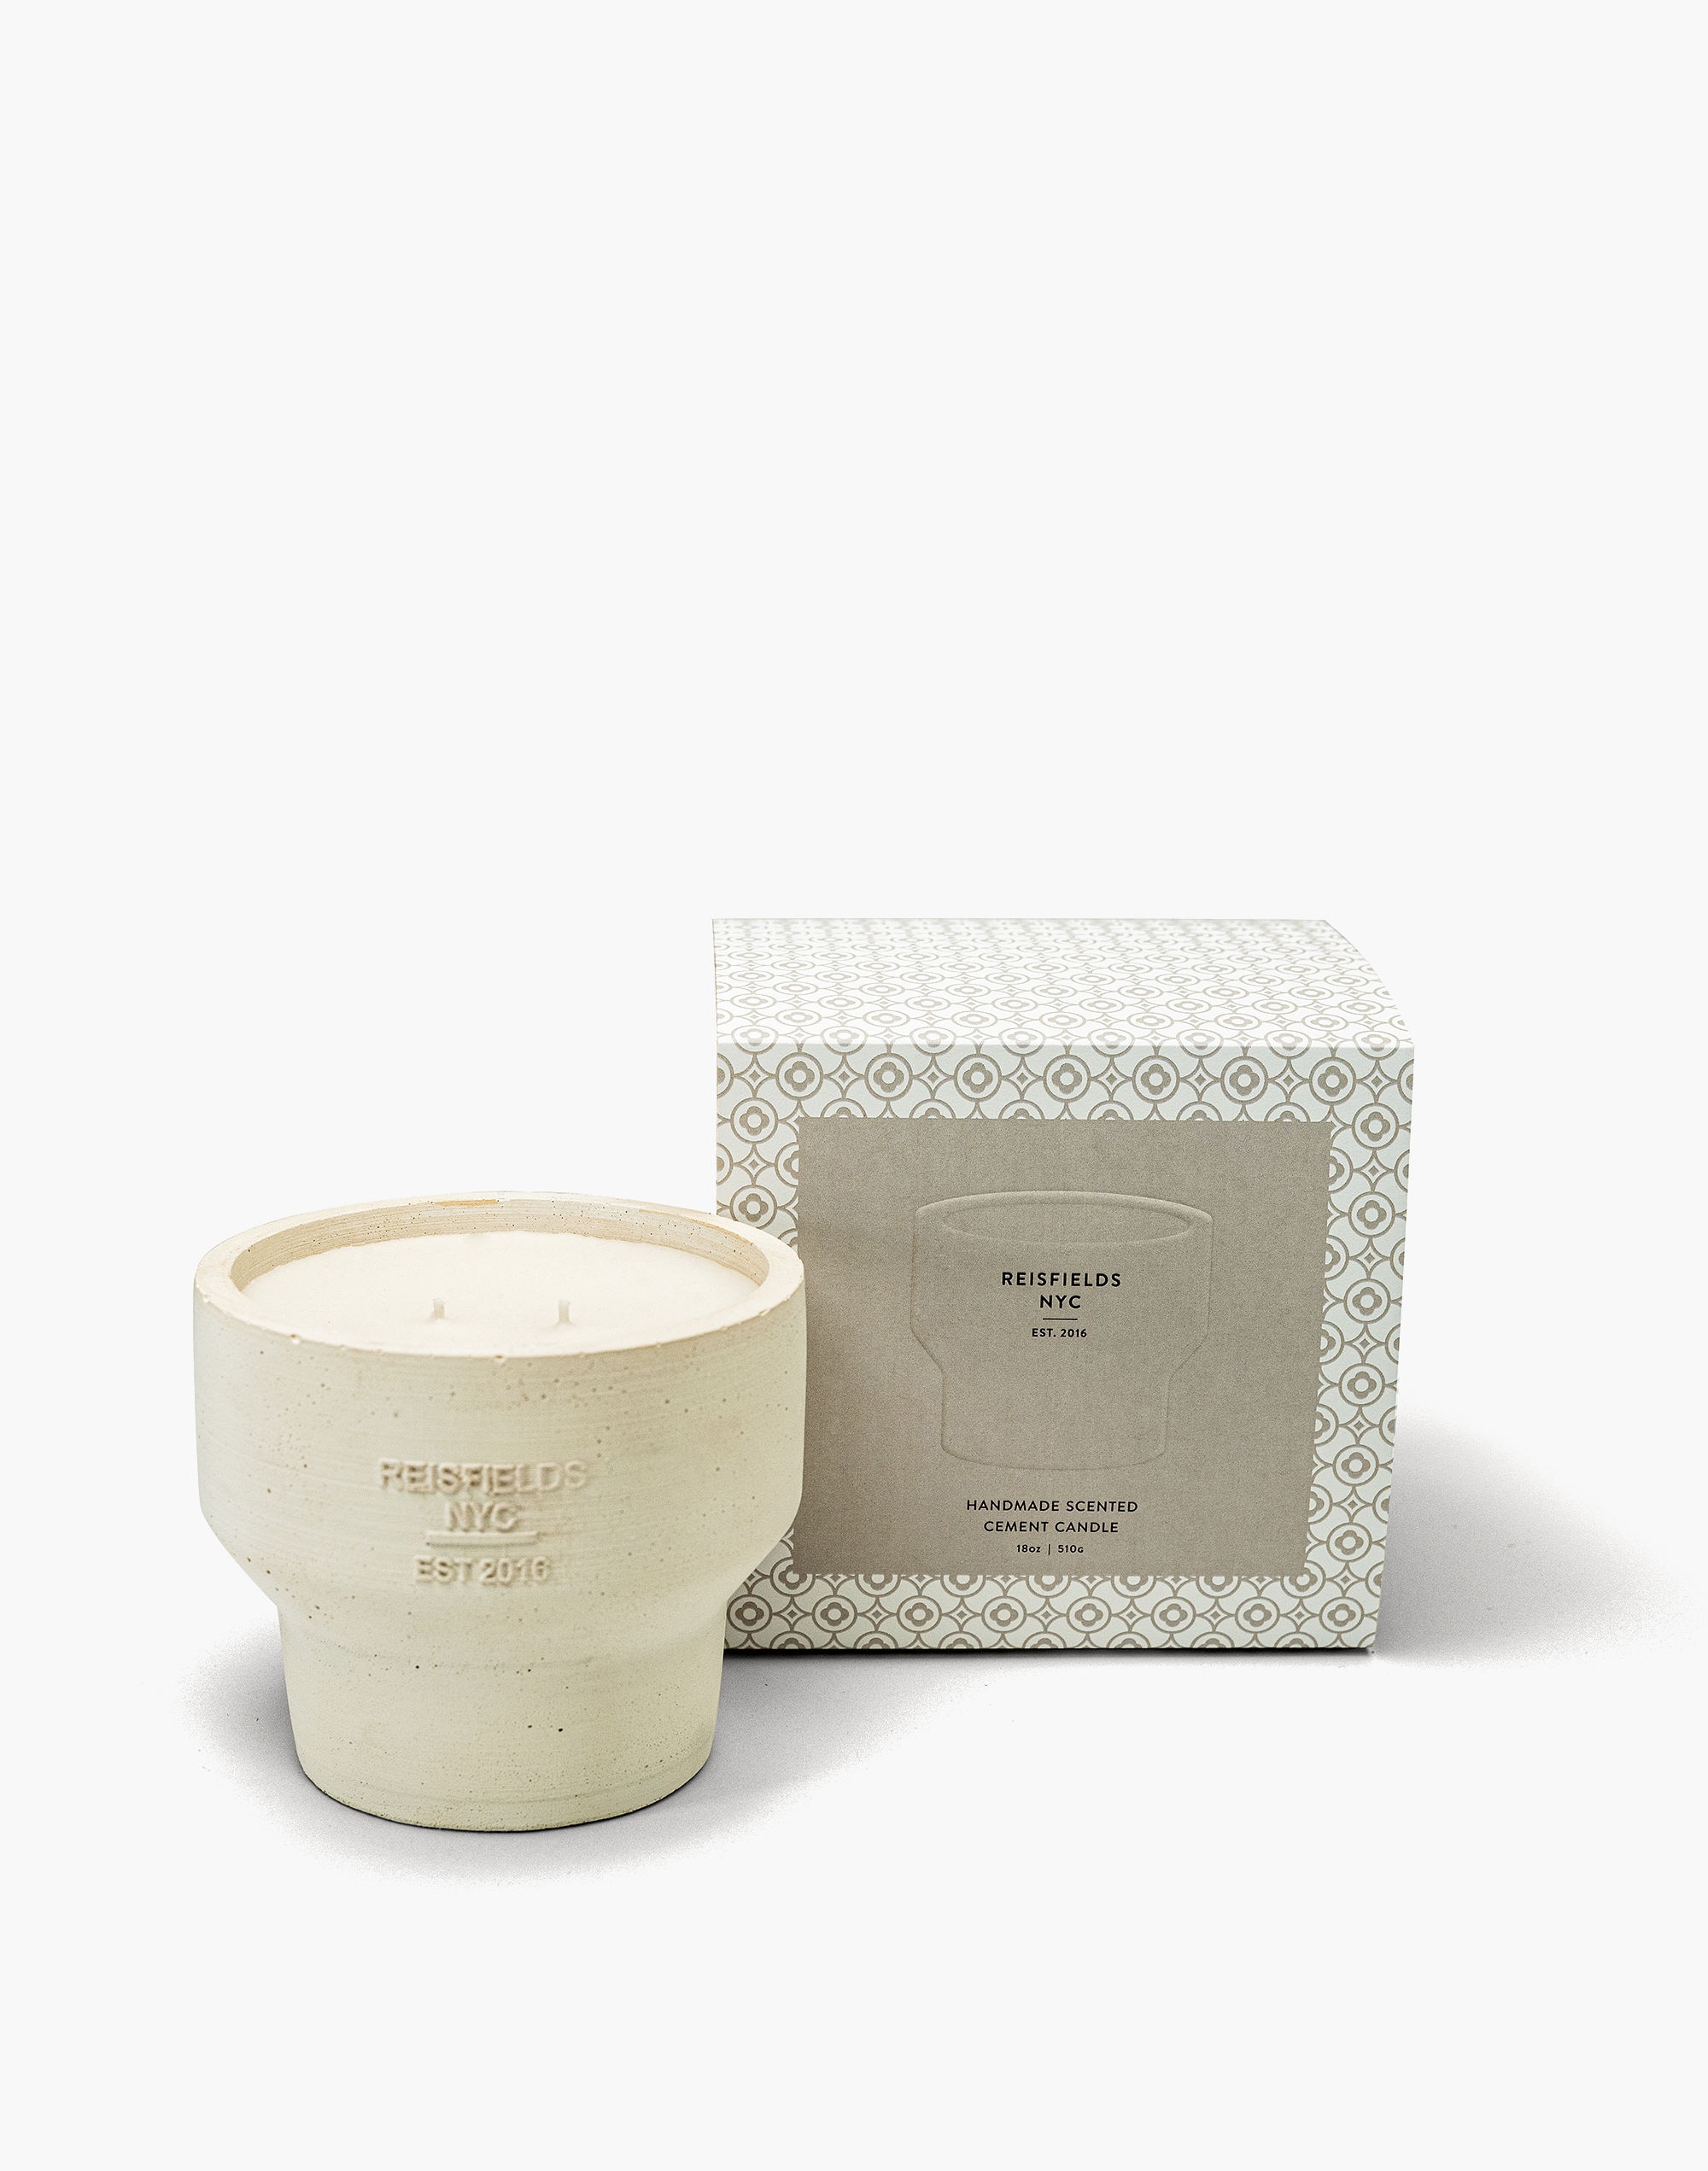 Reisfields NYC™ Cement Collection No. 2 Rose Geranium + Black Peppercorn Candle